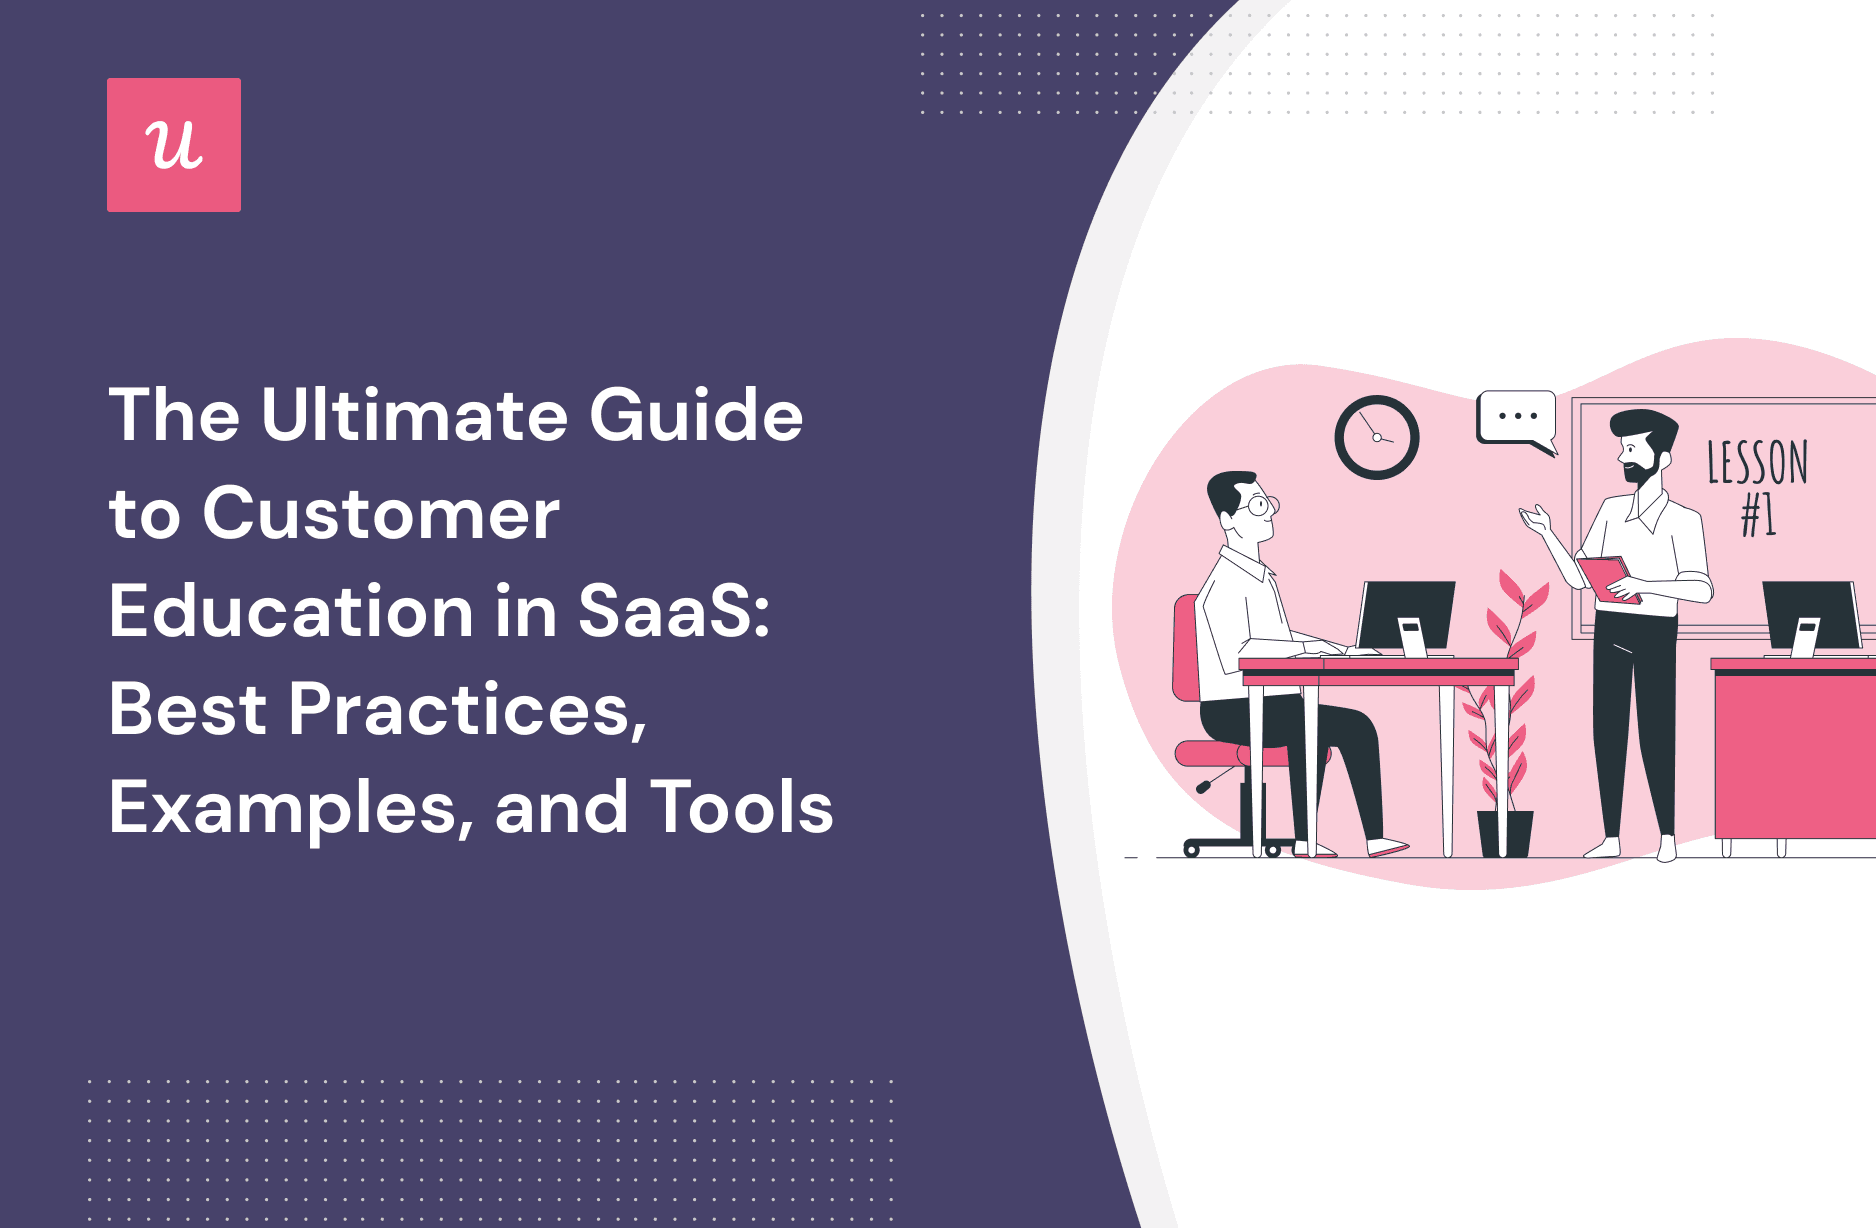 The Ultimate Guide to Customer Education in SaaS: Best Practices, Examples, and Tools cover